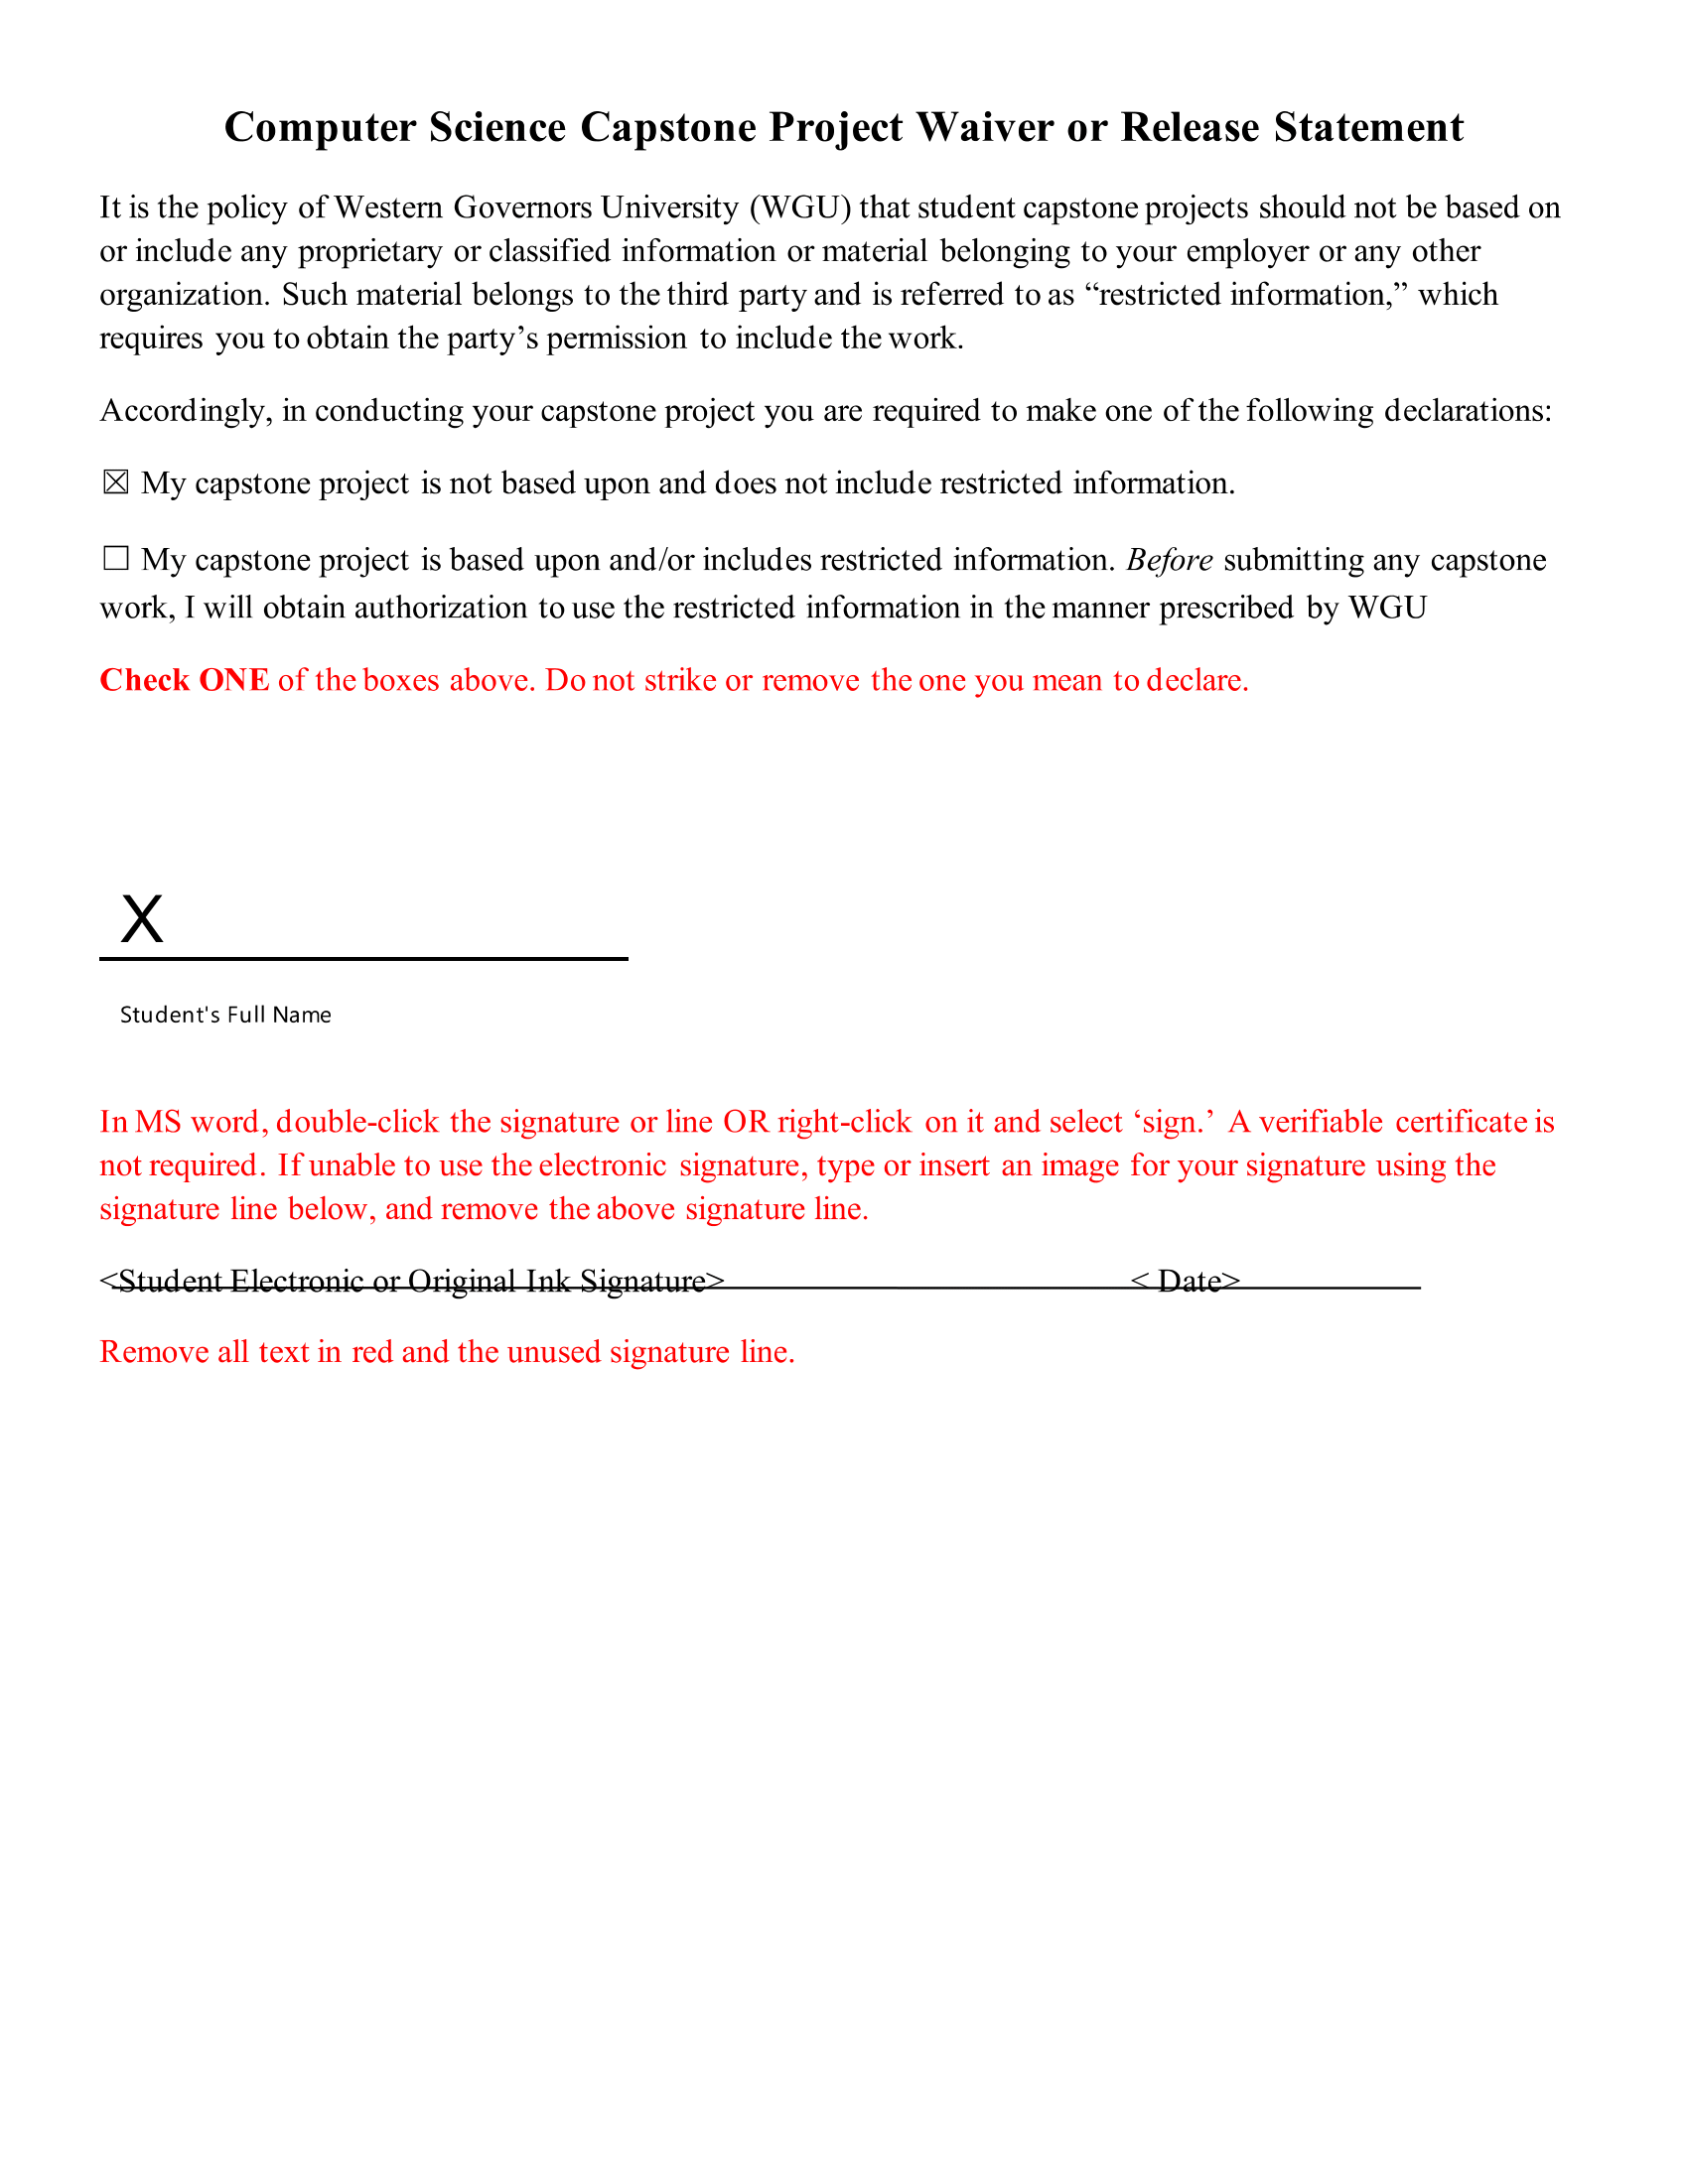 Image of the first page of the waiver Form